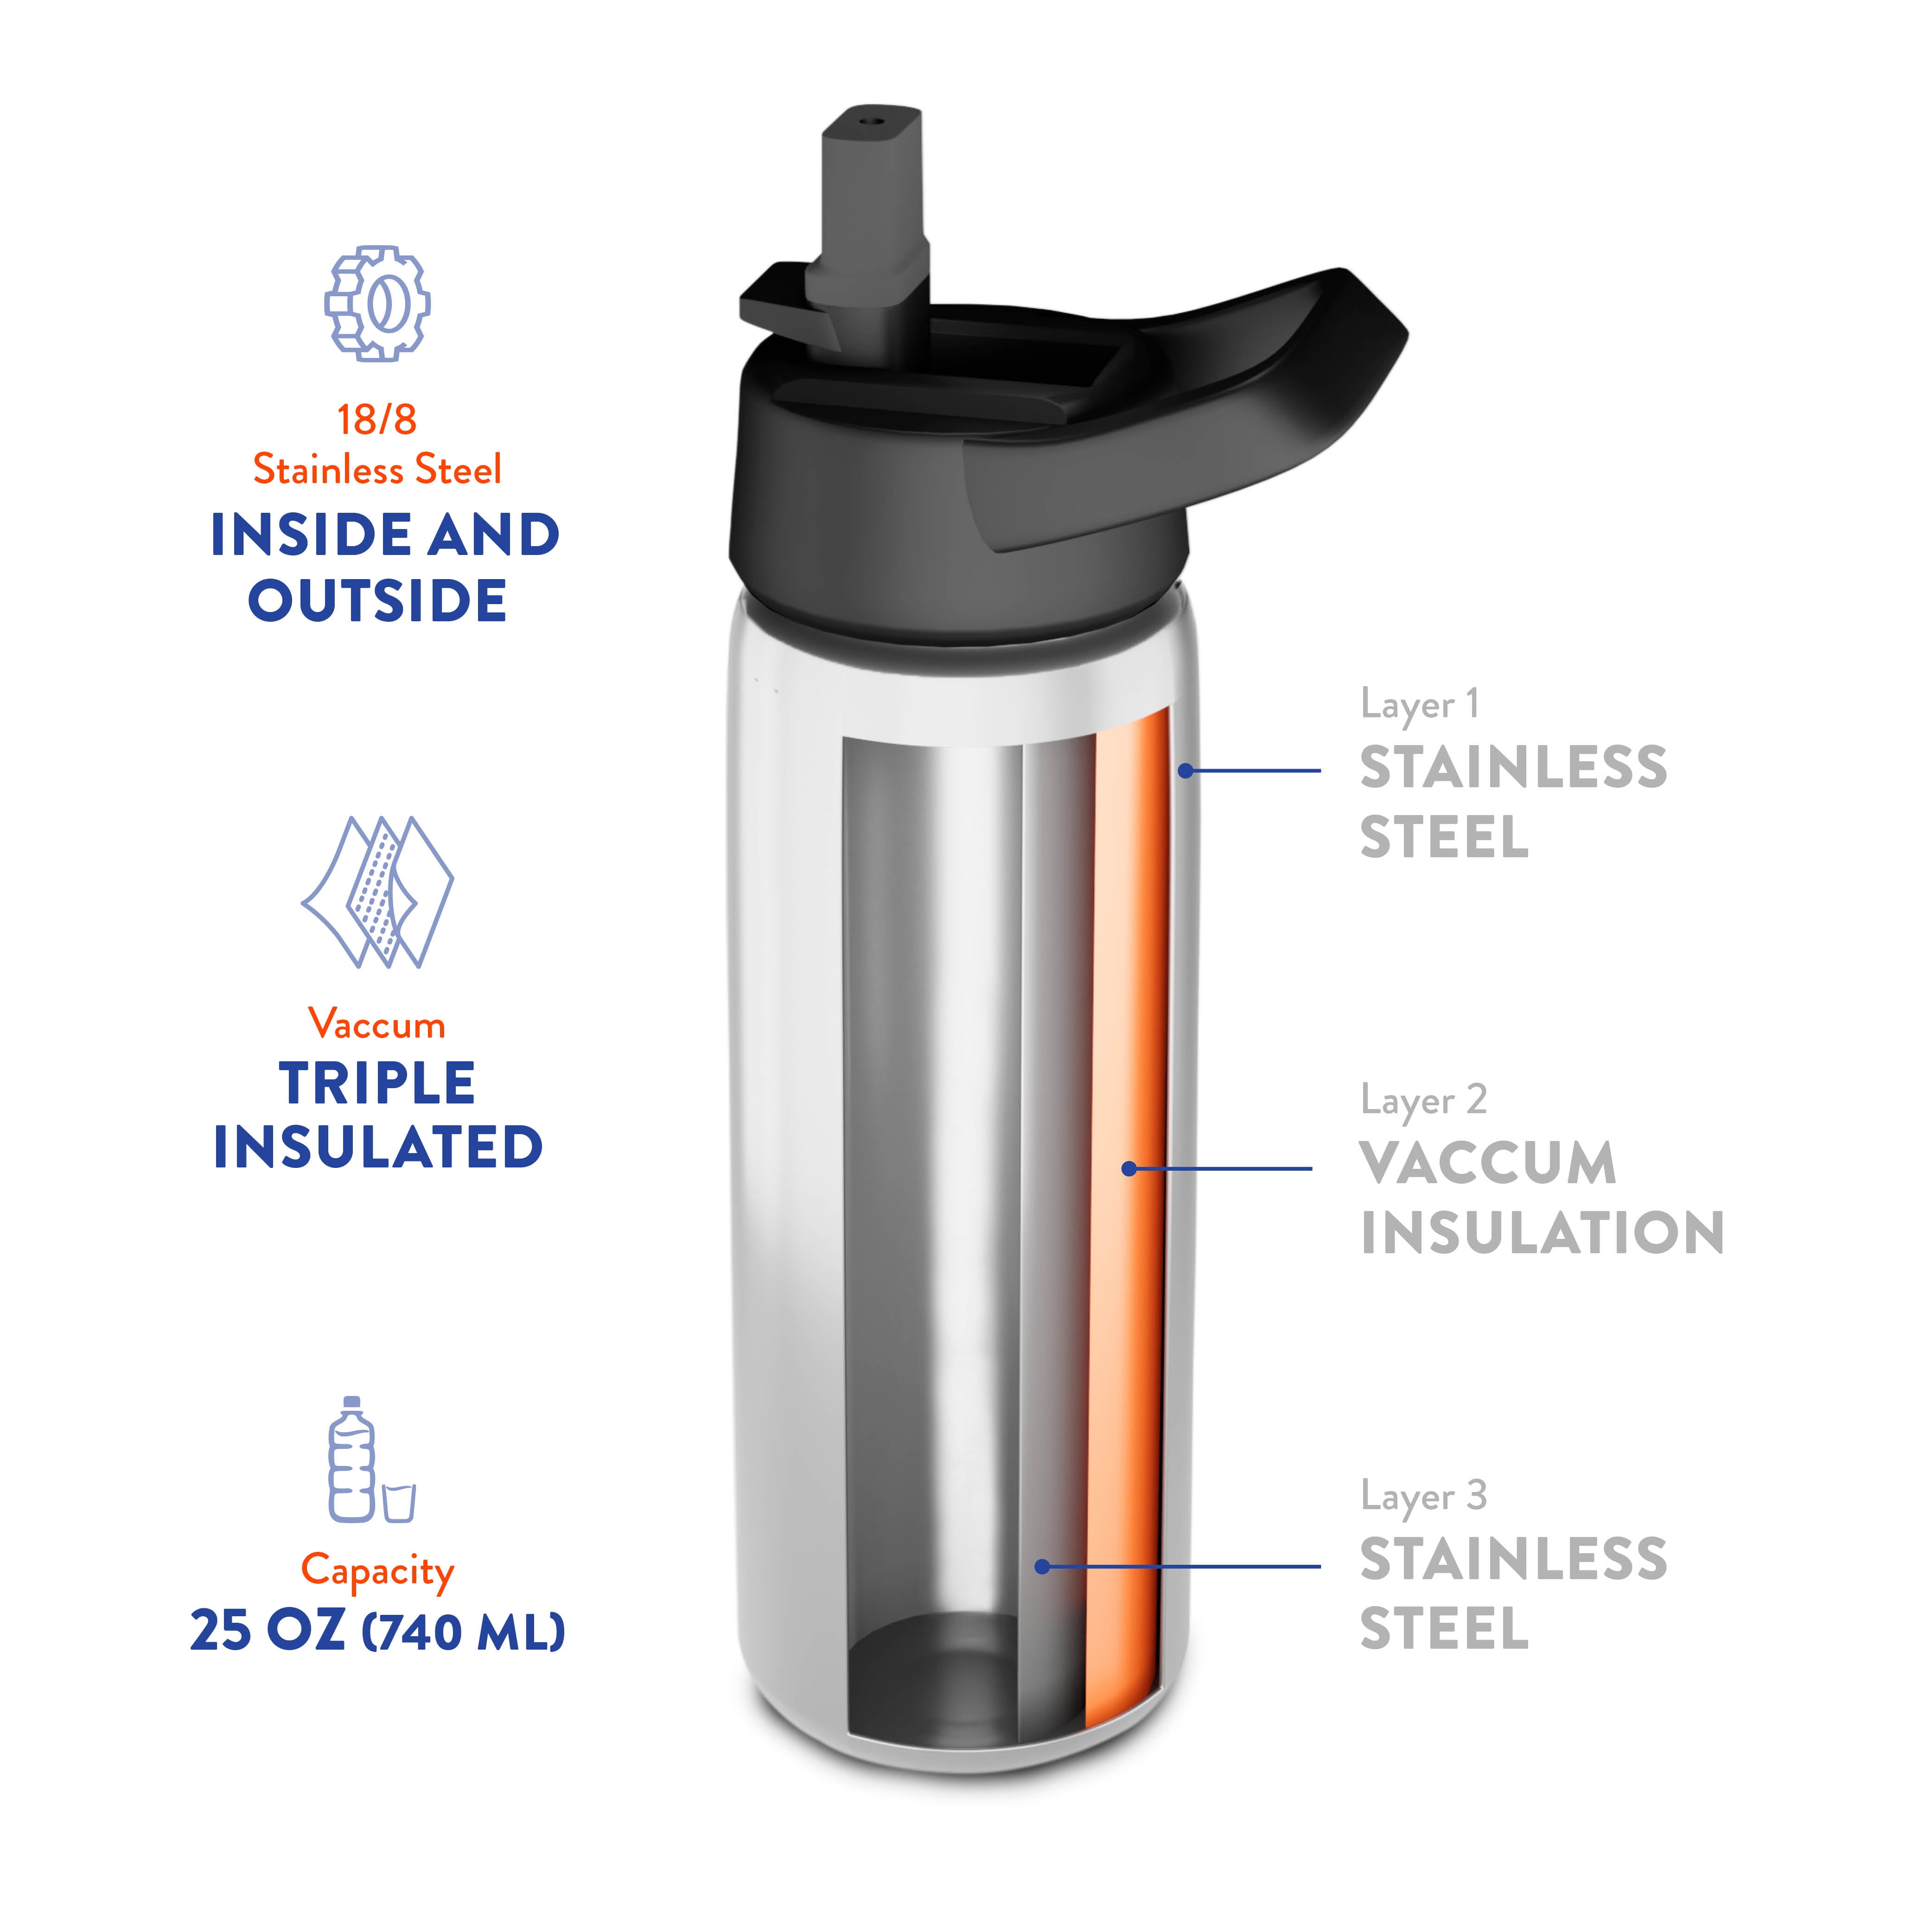 Insulated Water Bottles Triple-Insulated Stainless Steel Water Bottle with Straw Lid 25 Oz Keeps Hot and Cold Wide-Mouth Cap Flip-Top Lid Sports Canteen Water Bottle Great for Hiking & Biking 